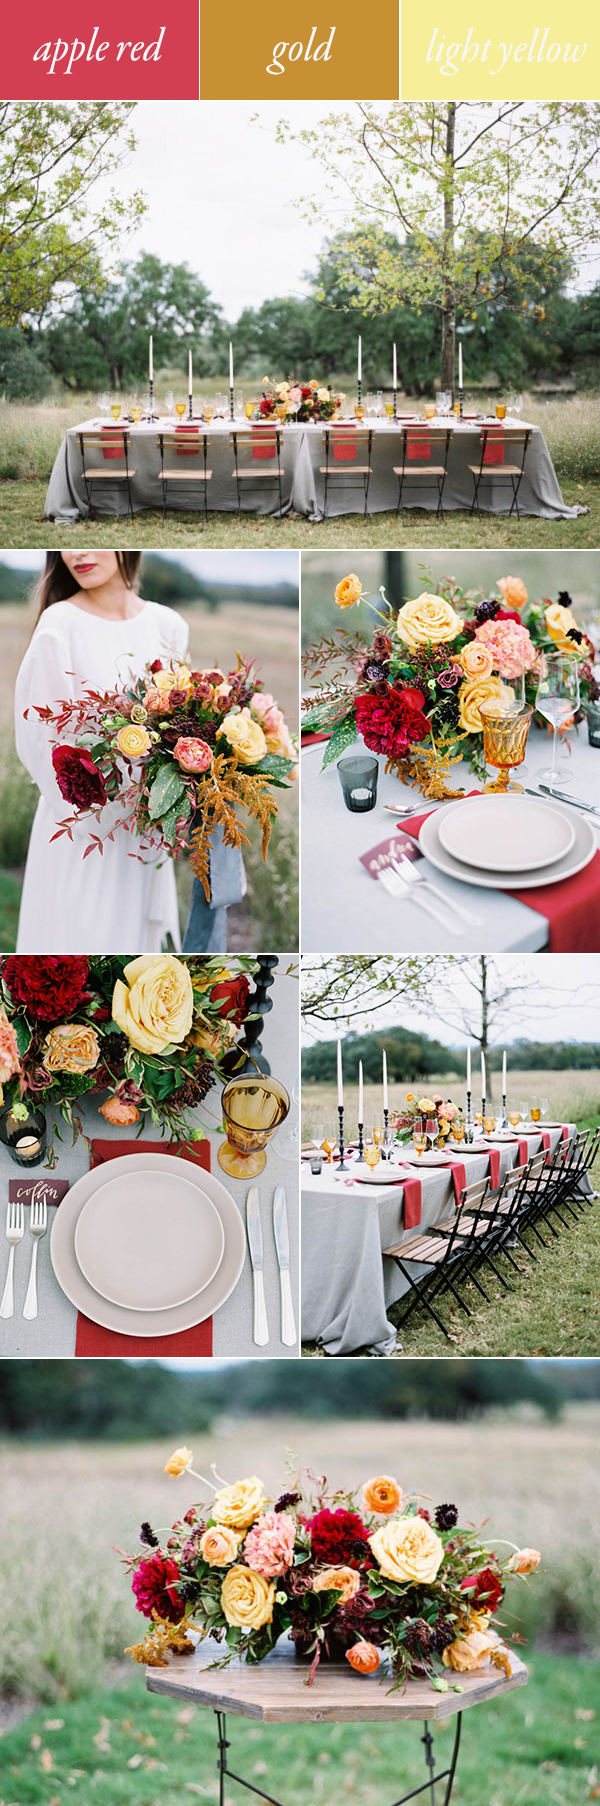 red gold yellow fall wedding color palette